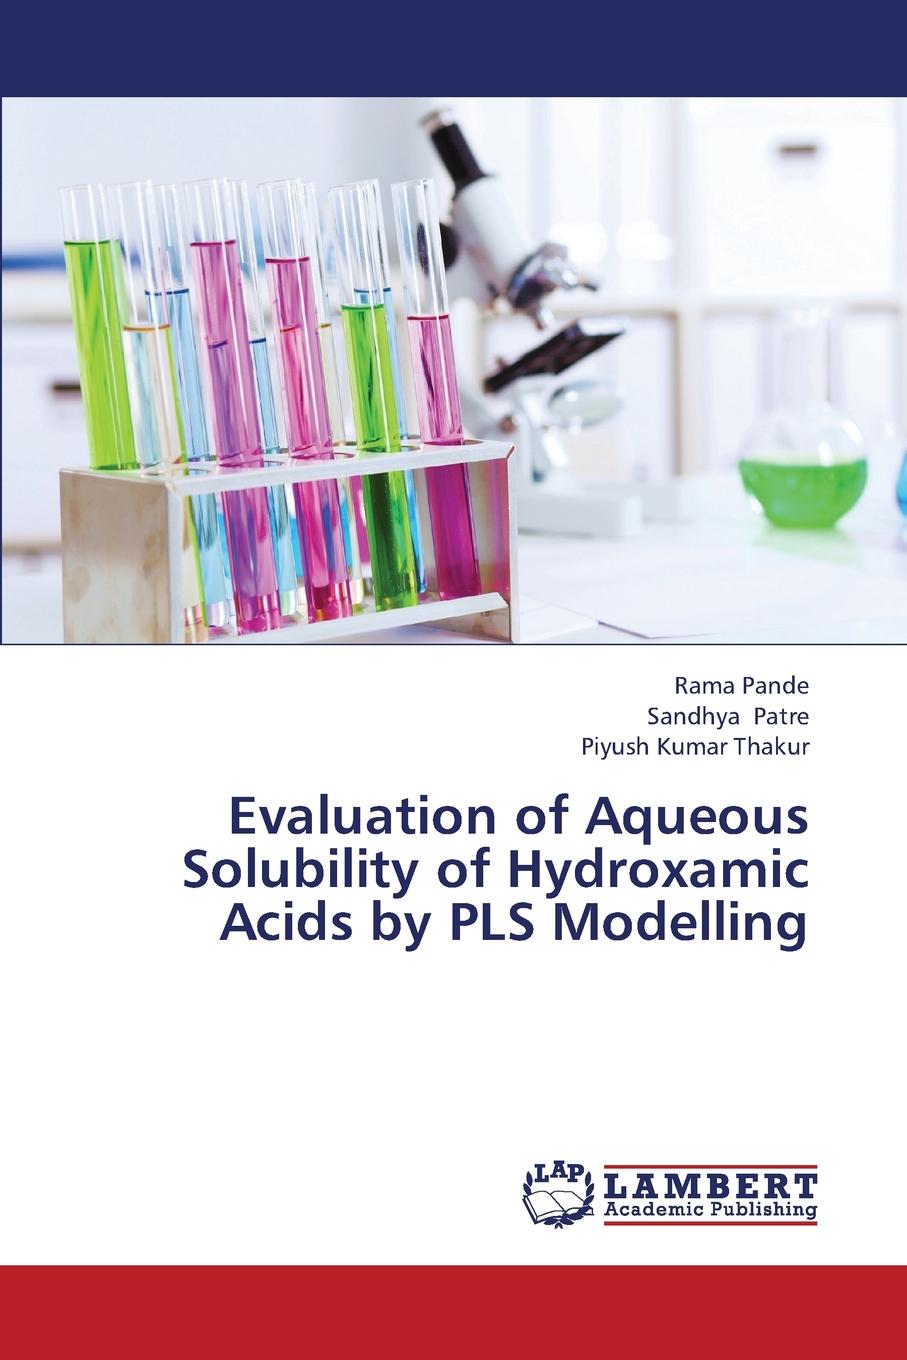 Evaluation of Aqueous Solubility of Hydroxamic Acids by Pls Modelling